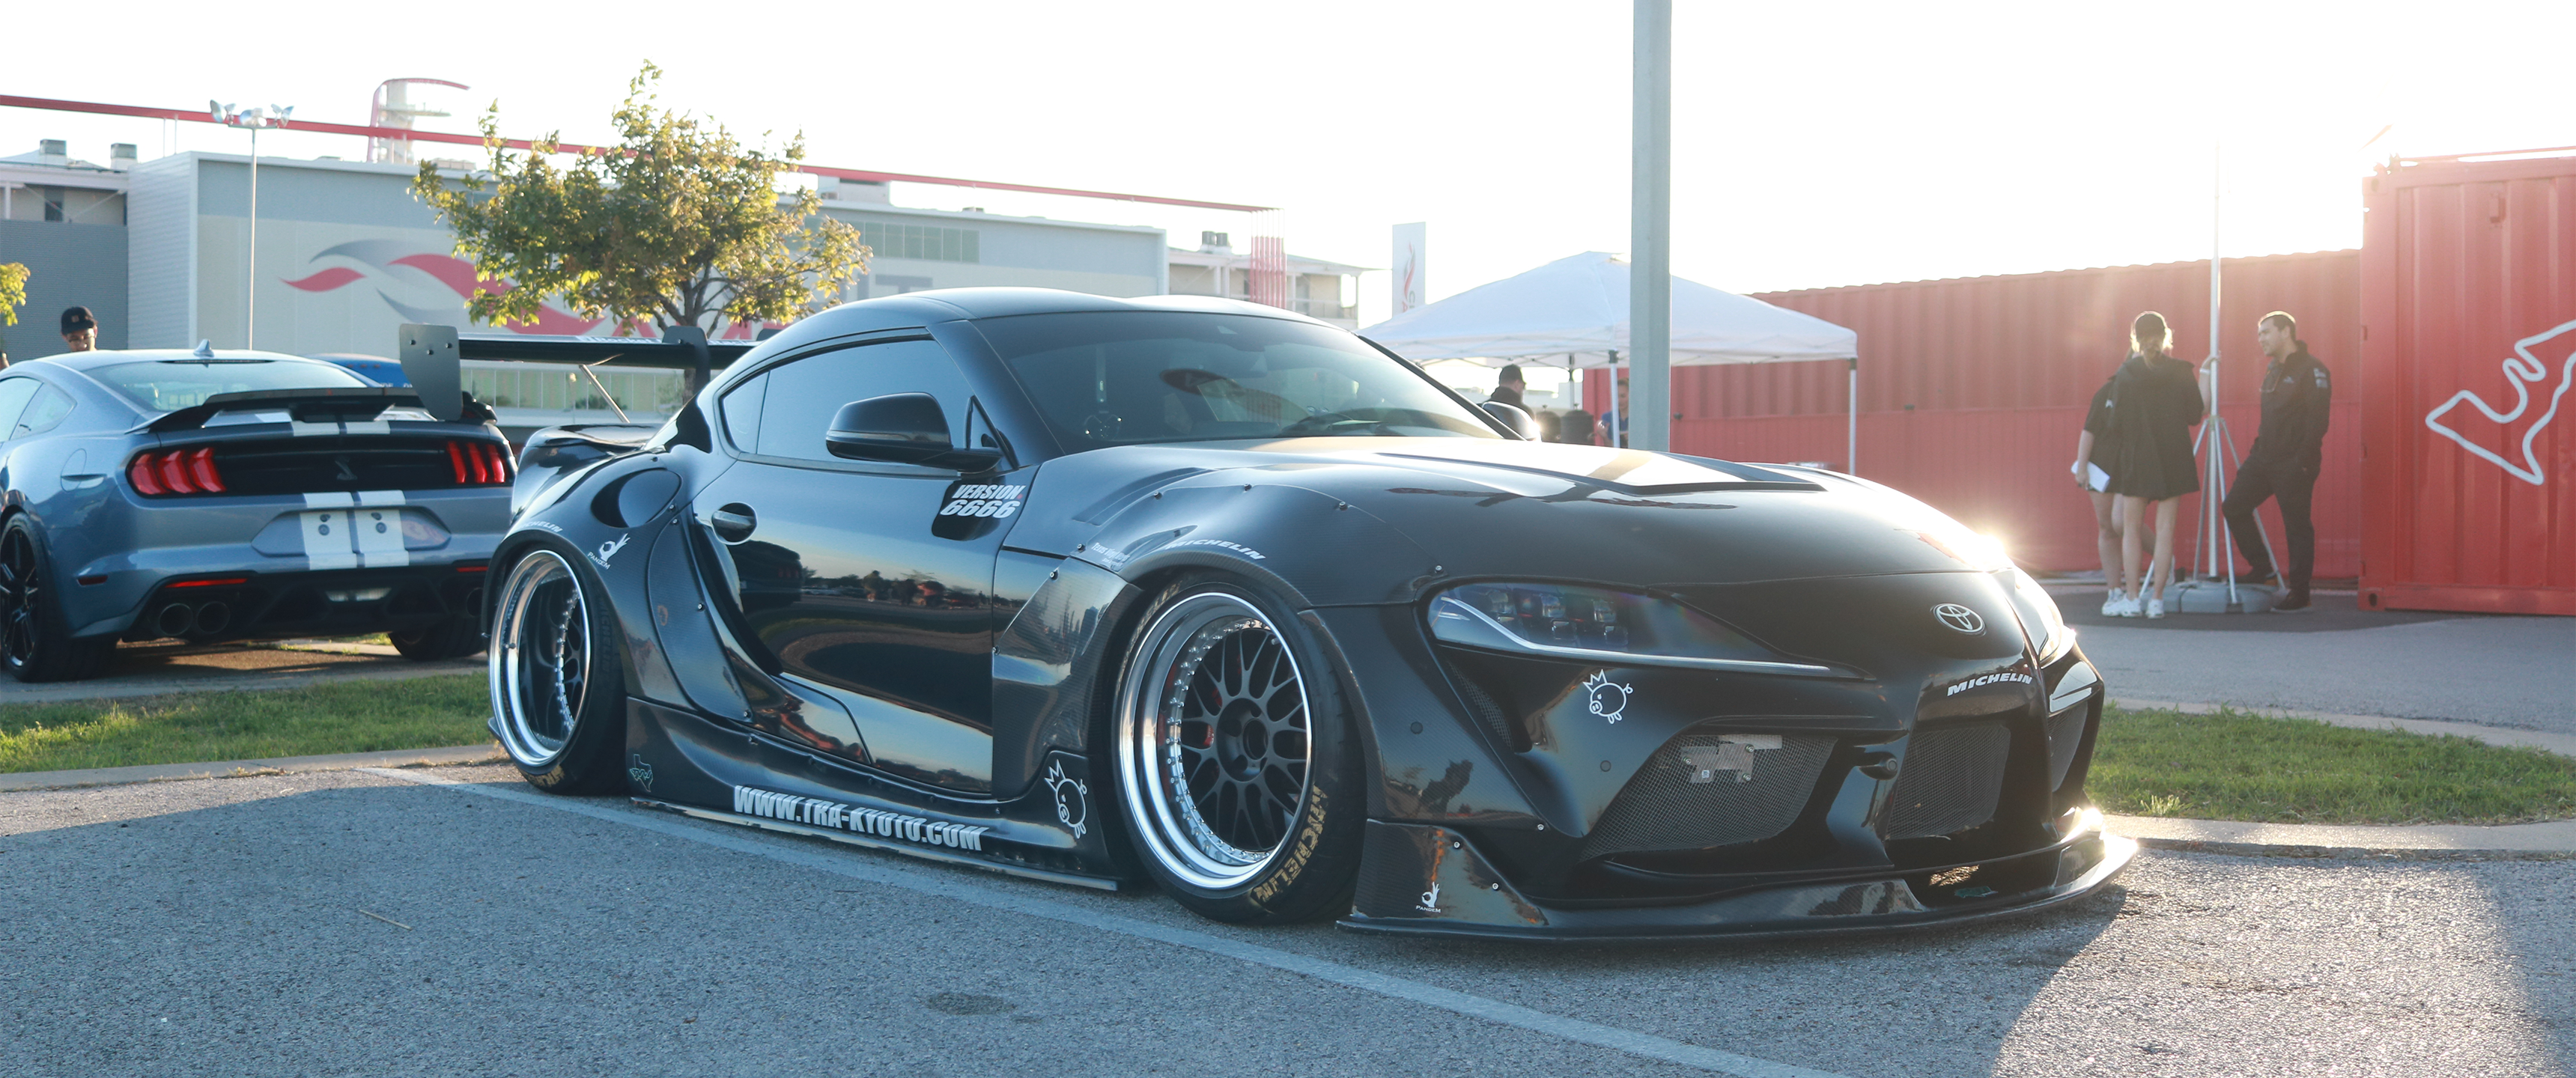 Car Stance Cars Toyota Toyota Supra Front Angle View Sunlight 3440x1440